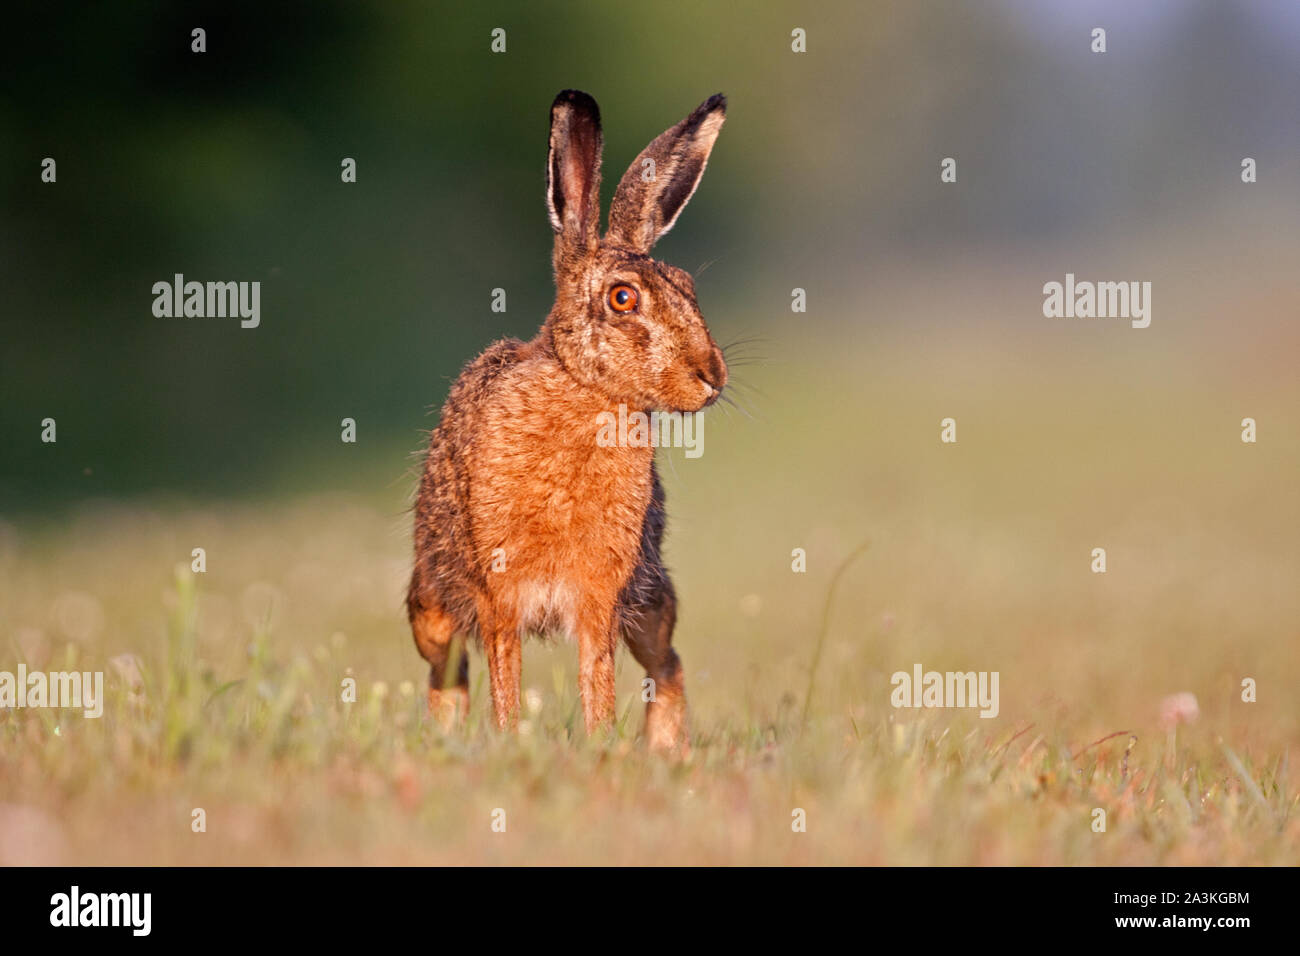 Watchful Brown hare keeping an eye on the photographer Stock Photo